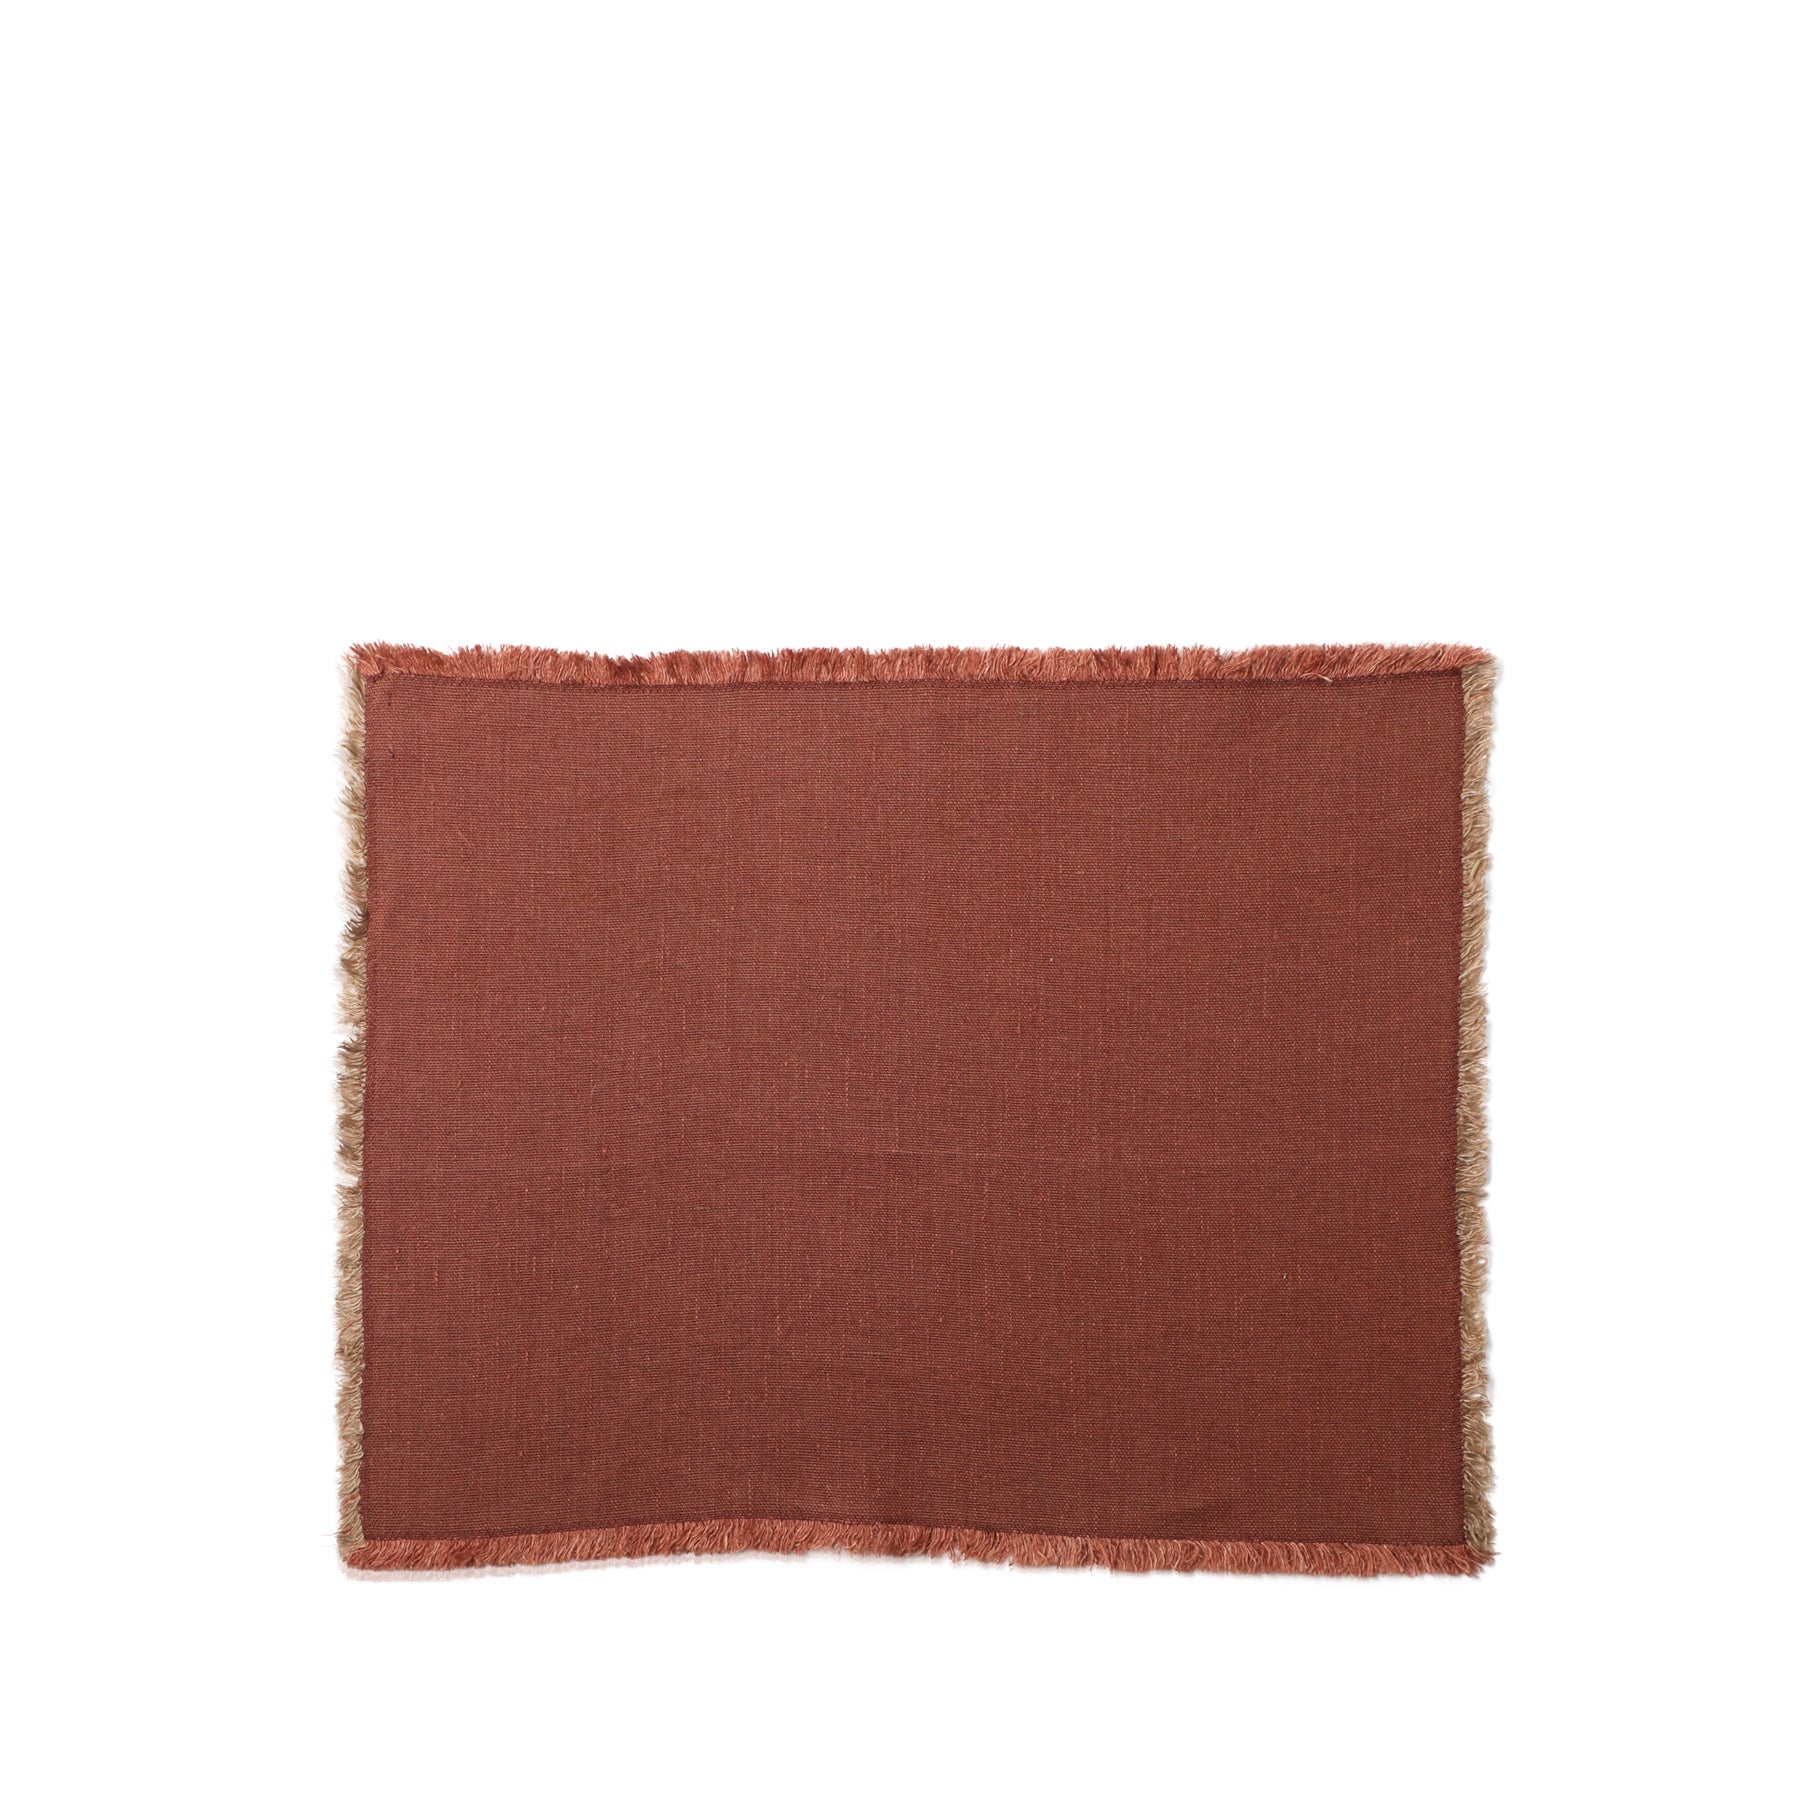 Linen Hopsack Placemat in Mattone Red (Set of 2) Zoom Image 1